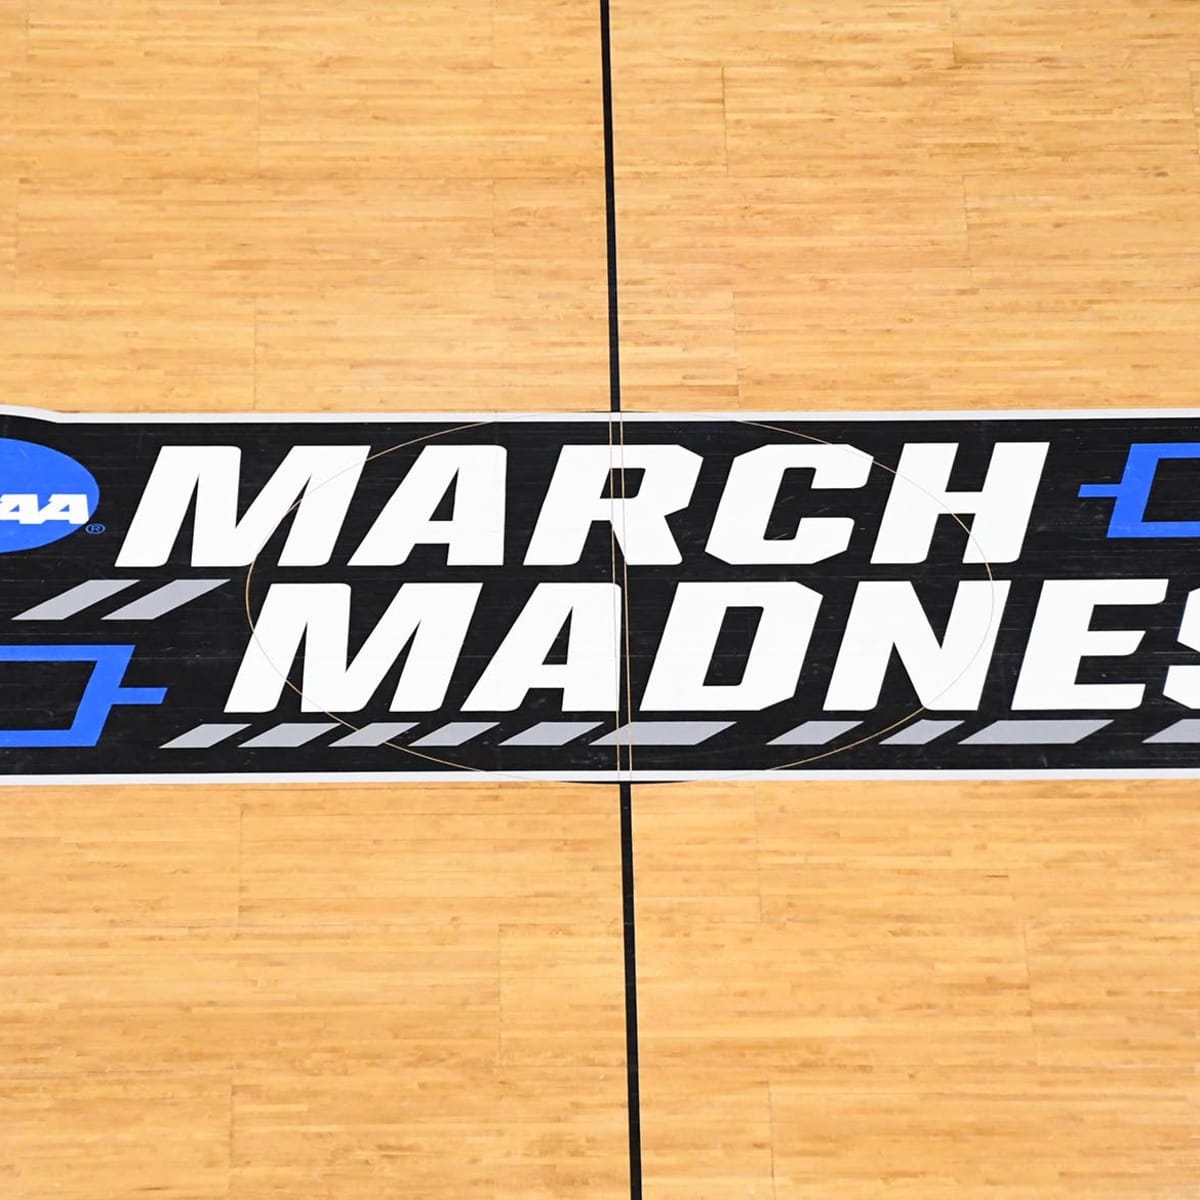 What channel is truTV? 2021 March Madness cable info, game schedule